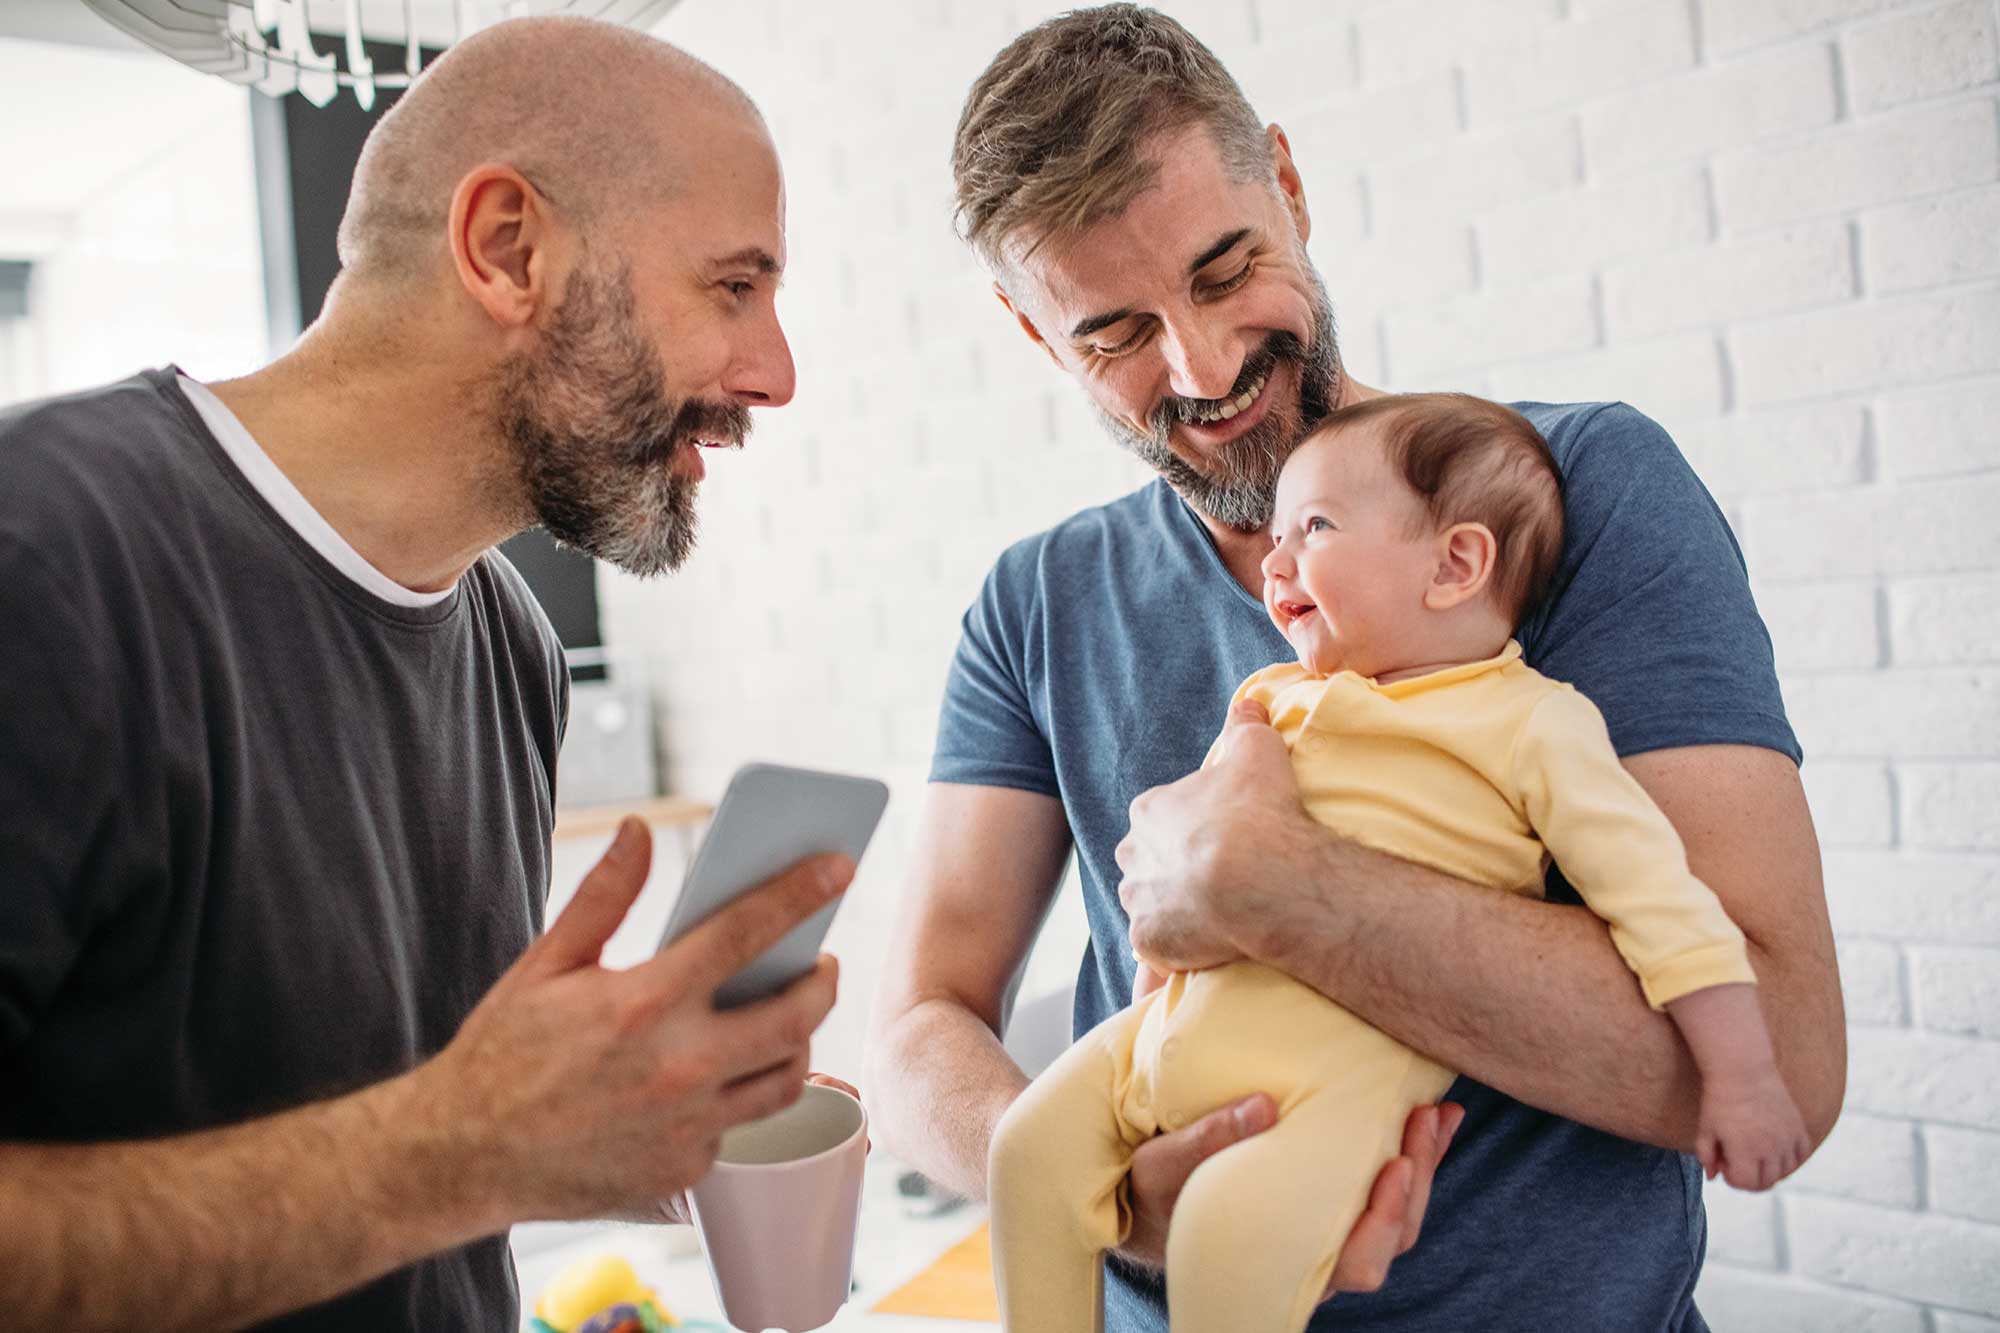 One man holding a cell phone, one man holding a baby, happy family